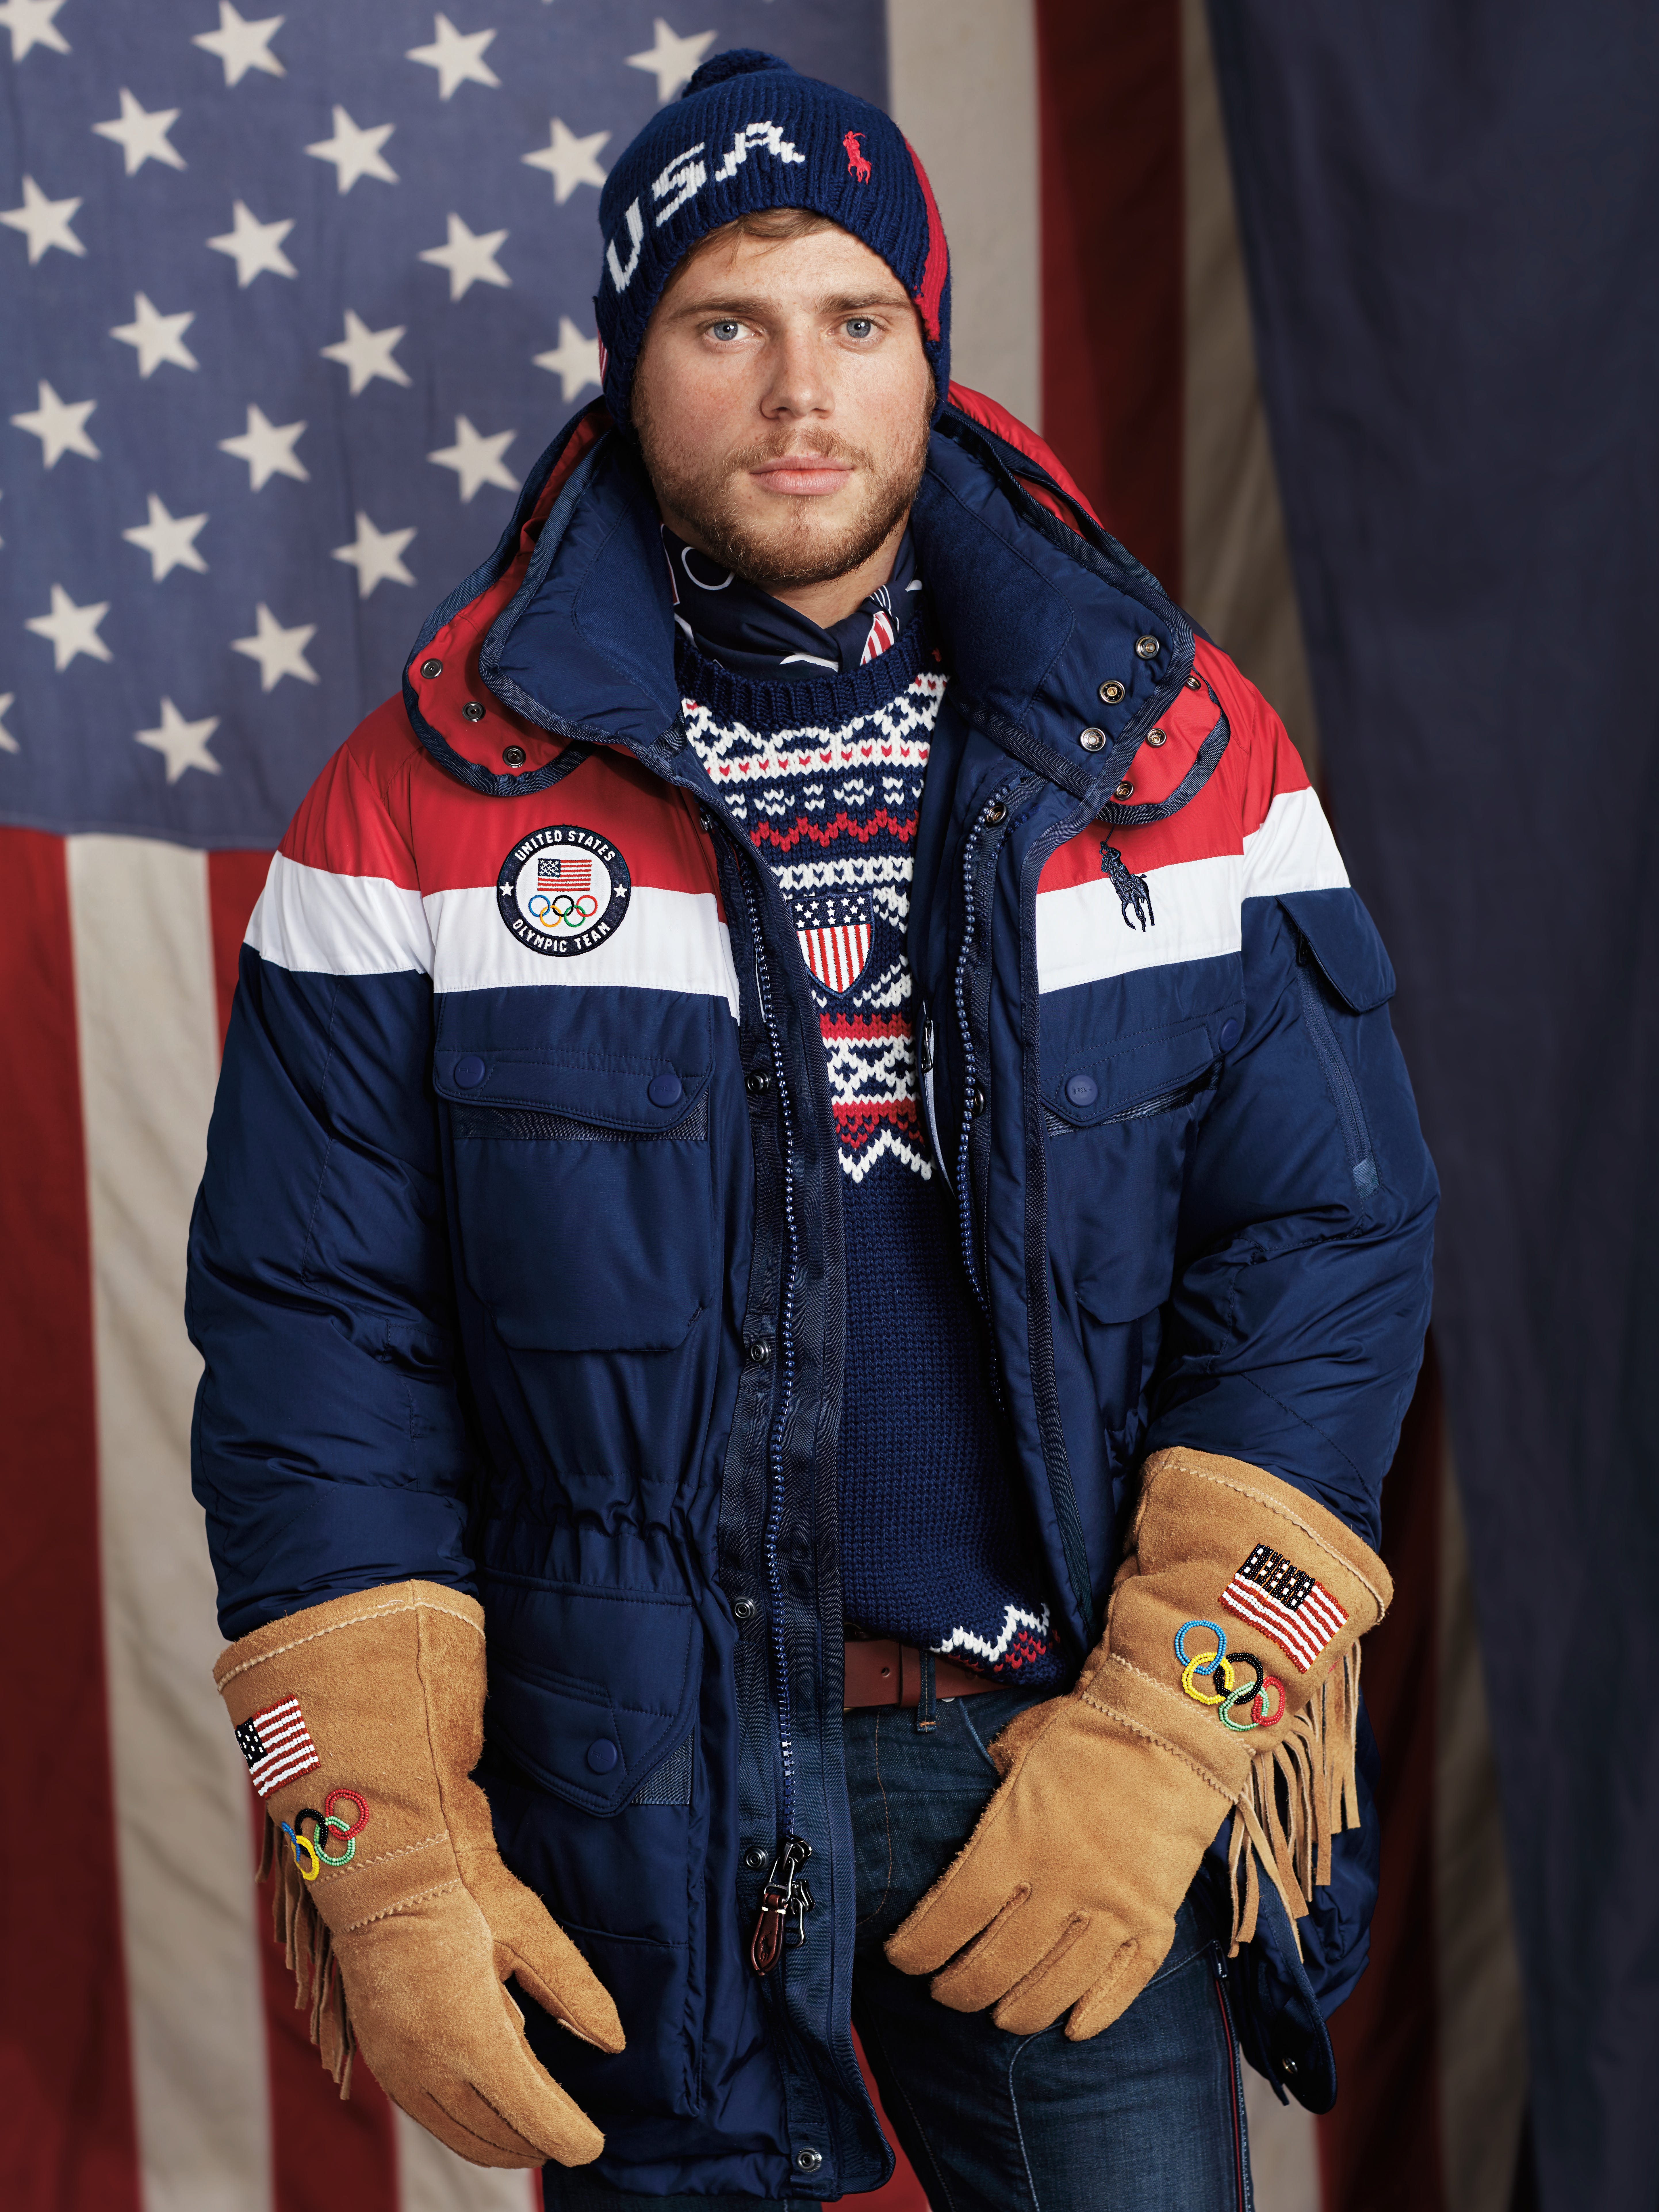 Exclusive: Ralph Lauren's Olympic uniforms are wearable mini heaters